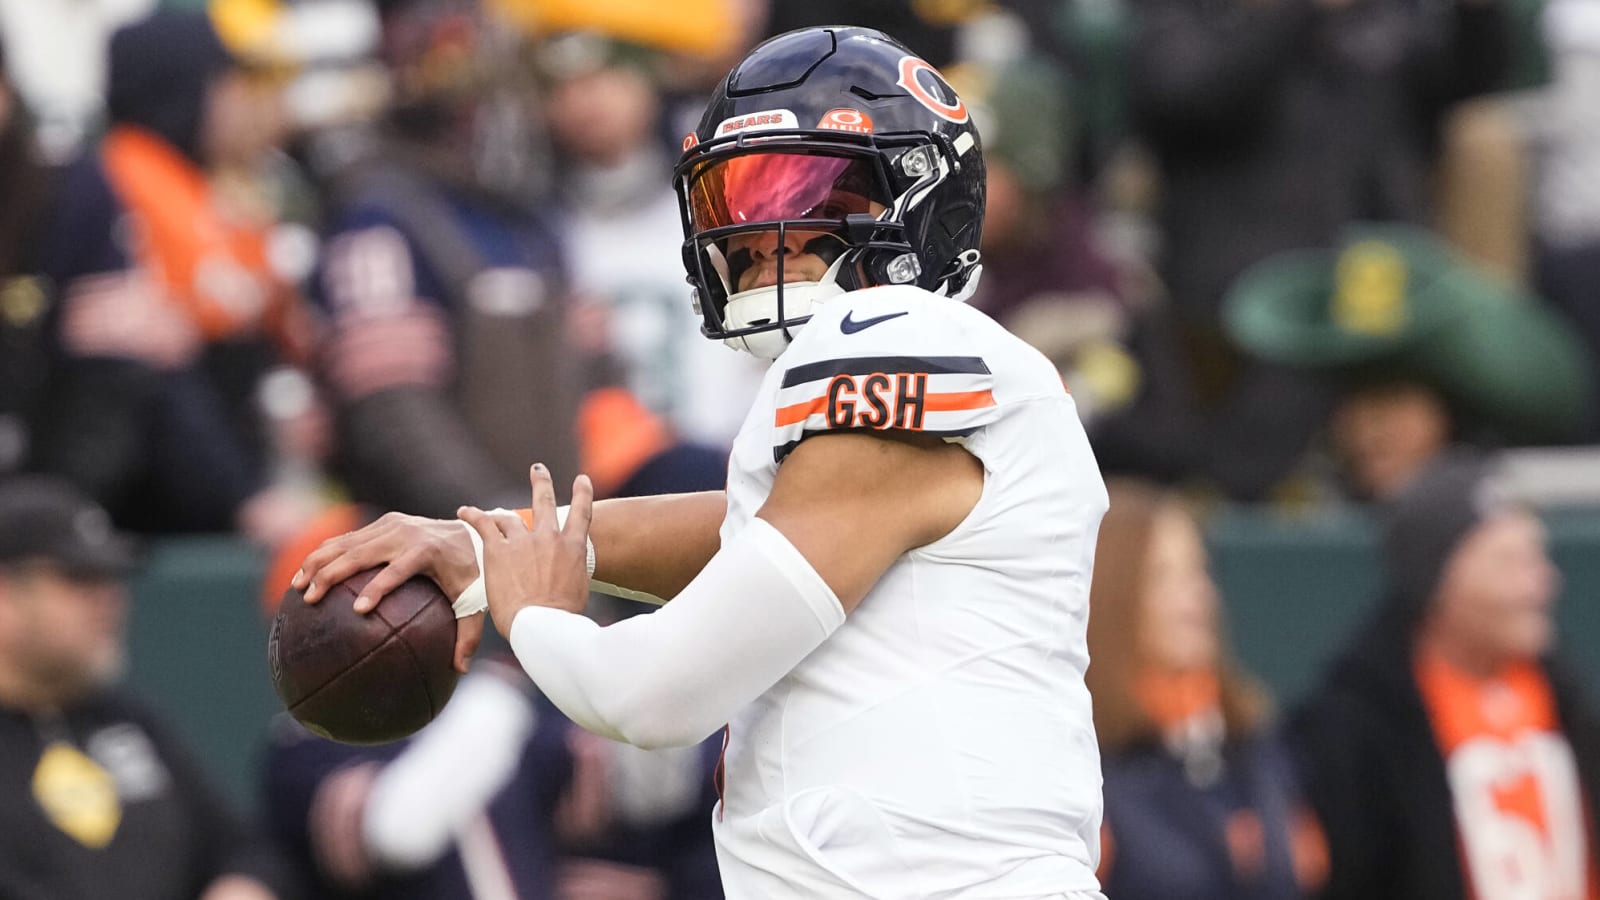 Top 5 Potential Landing Spots For Bears’ QB Justin Fields